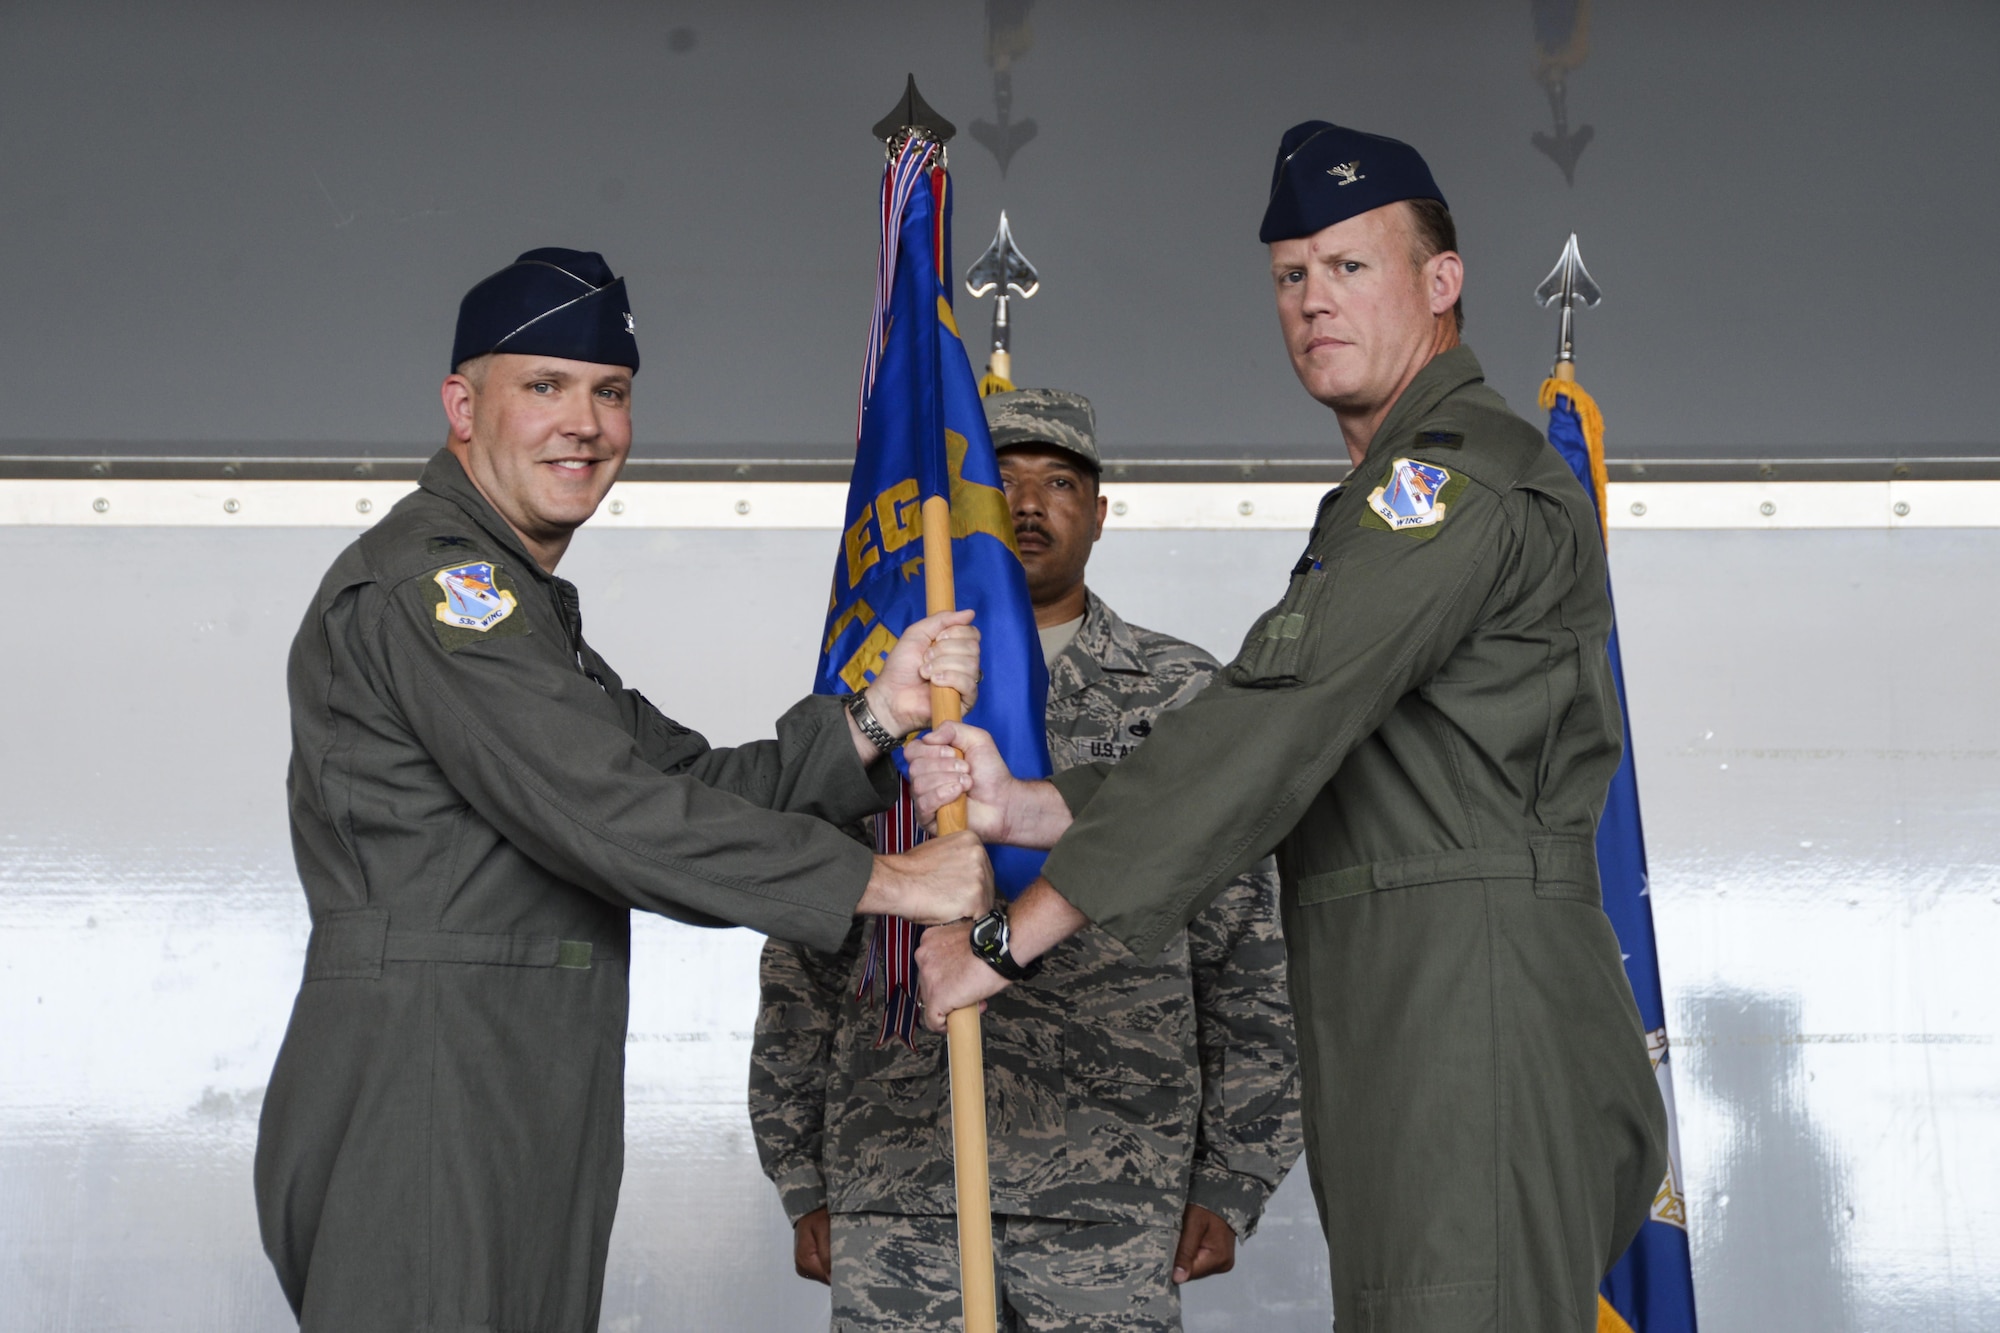 Col. Brian Schafer assumes command of the 53rd Test and Evaluation Group from Col. David Abba, 53rd Wing commander, at Nellis Air Force Base, Nev., July 11, 2017. The 53rd TEG is responsible for the overall execution of the 53rd Wing’s flying activities. (U.S. Air Force photo by Airman 1st Class Andrew D. Sarver/Released)